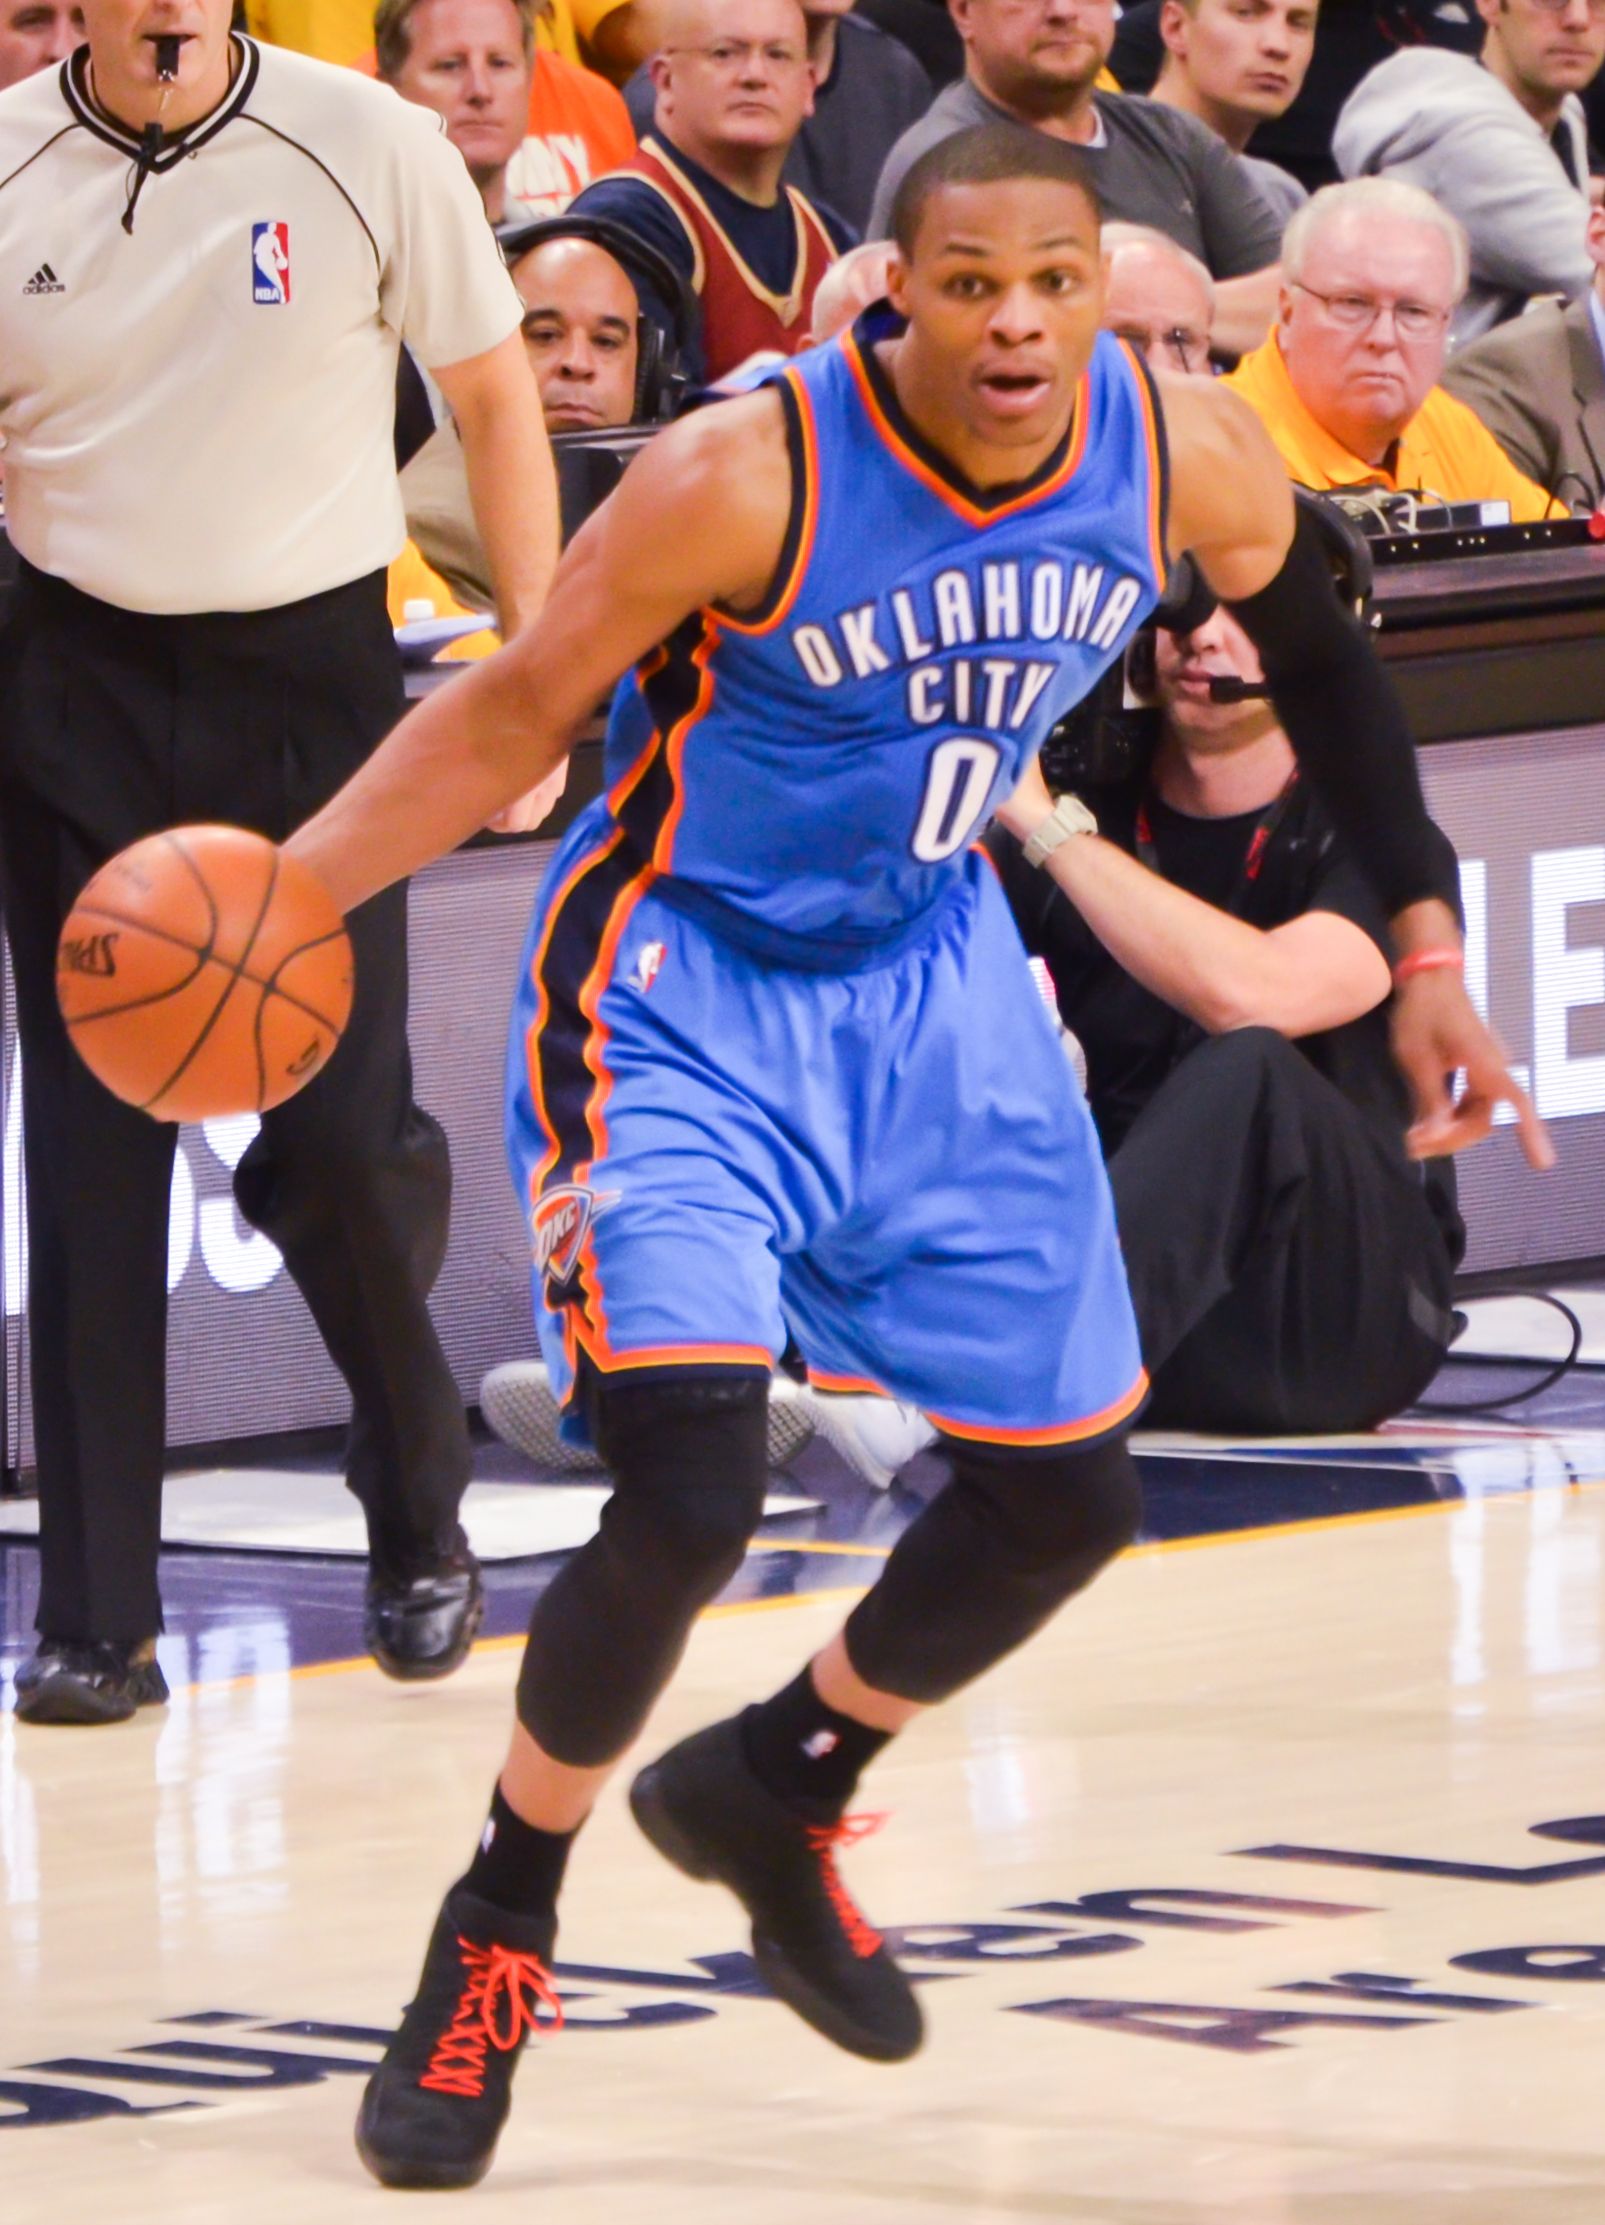 Russell Westbrook dribbling the basketball.